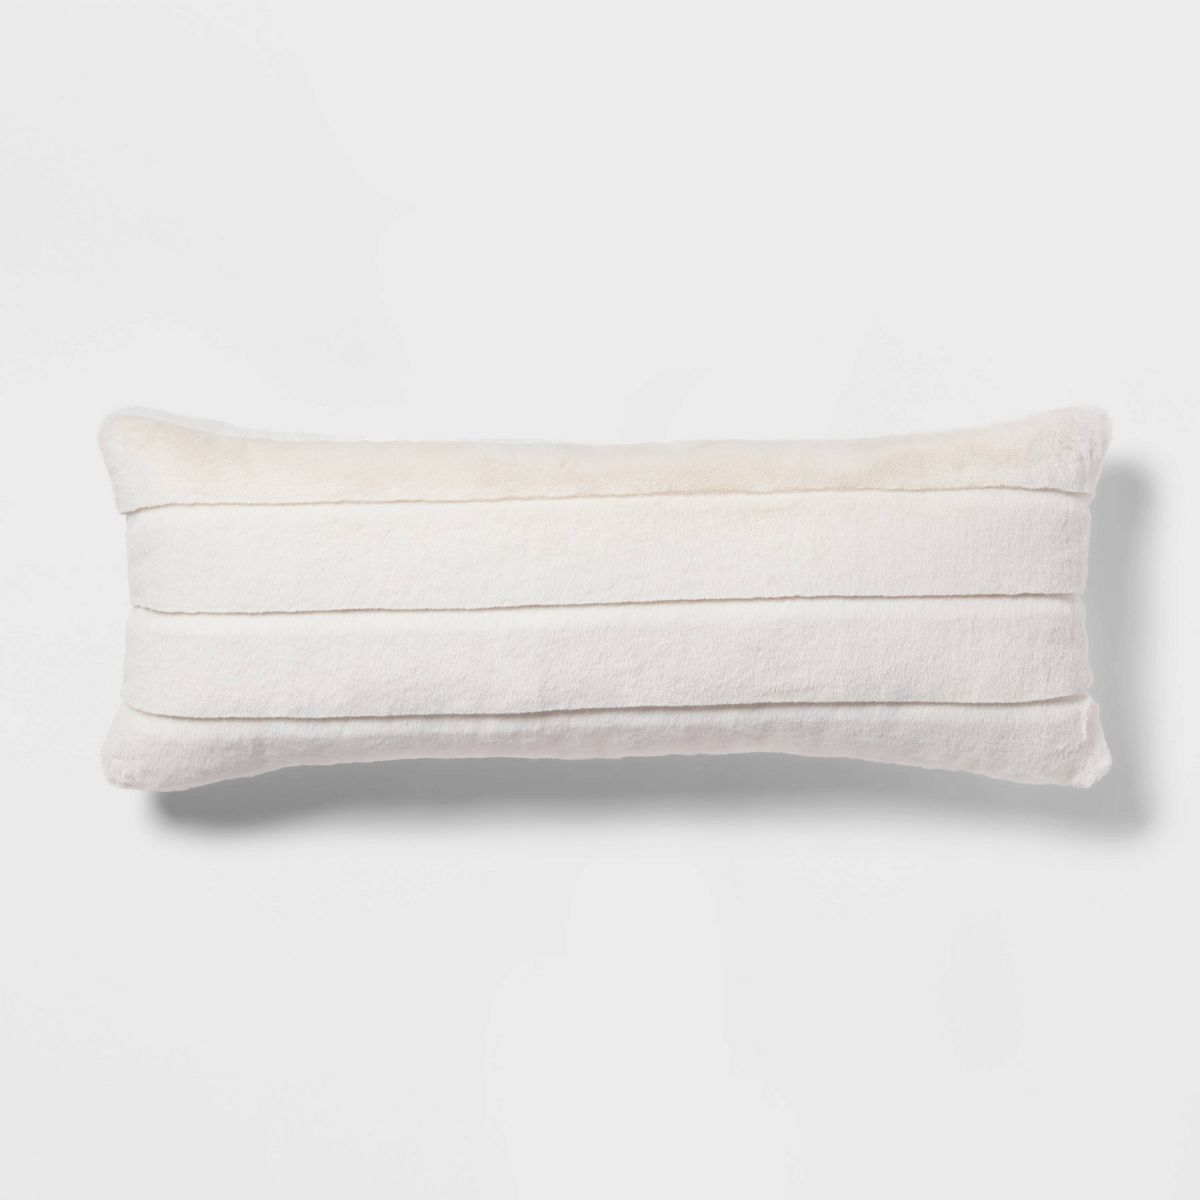 Oversized Oblong Faux Fur Channeled Decorative Throw Pillow Cream - Threshold™ | Target